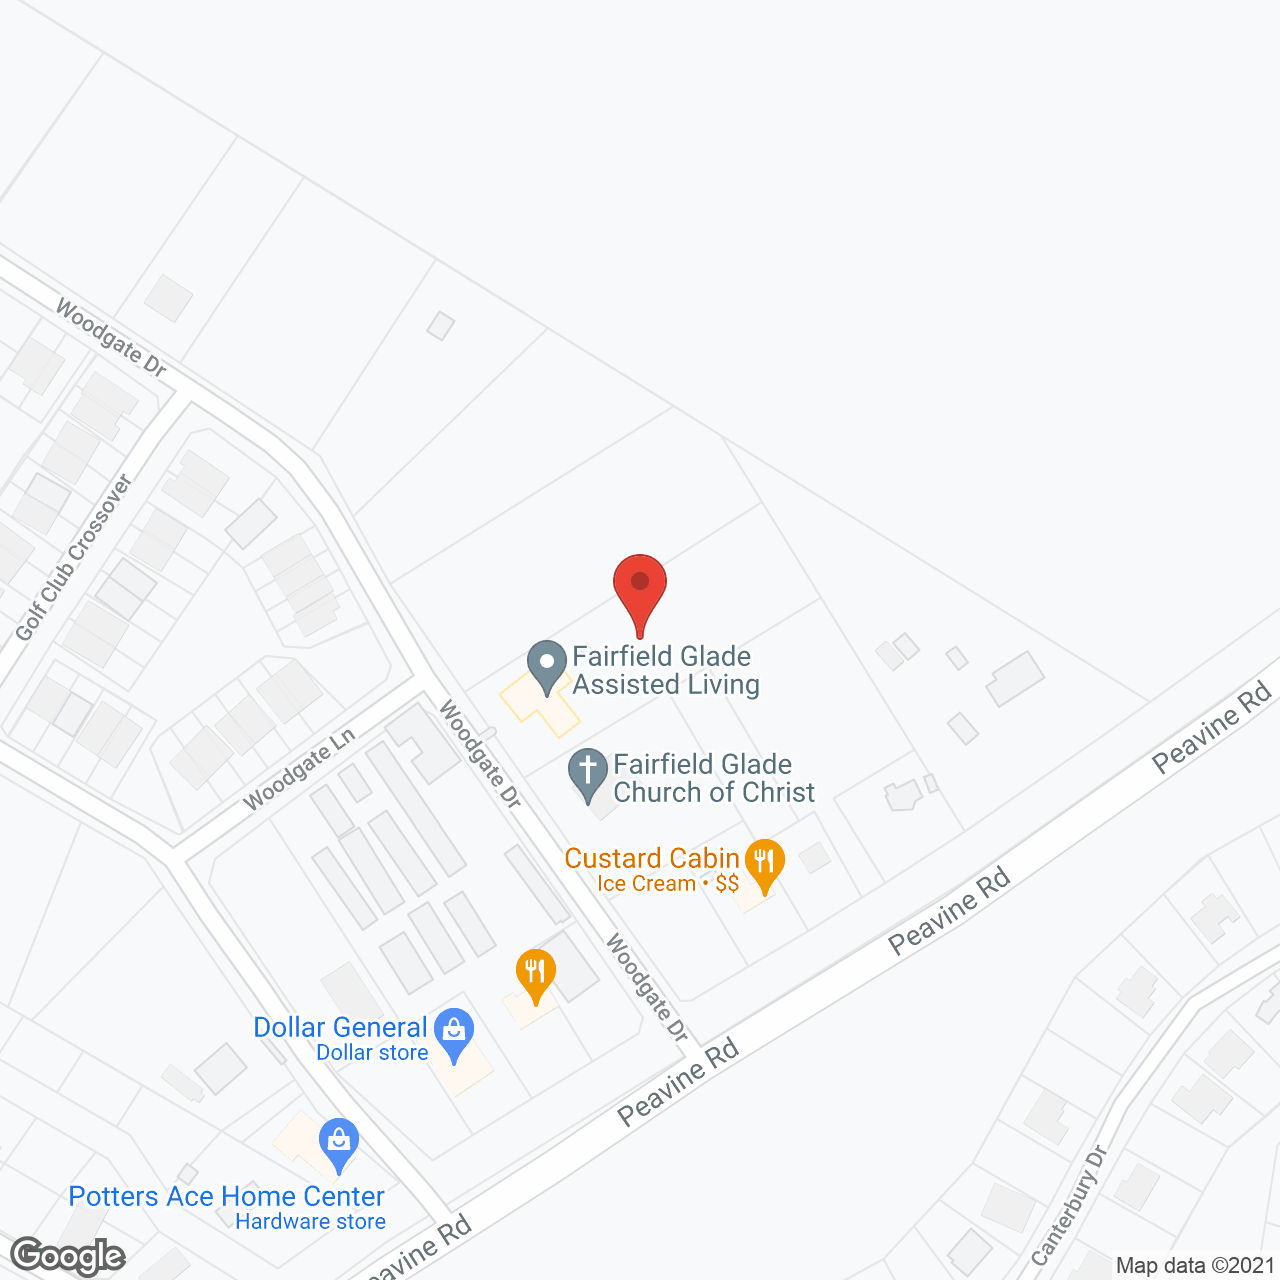 Fairfield Glade Assisted Living in google map